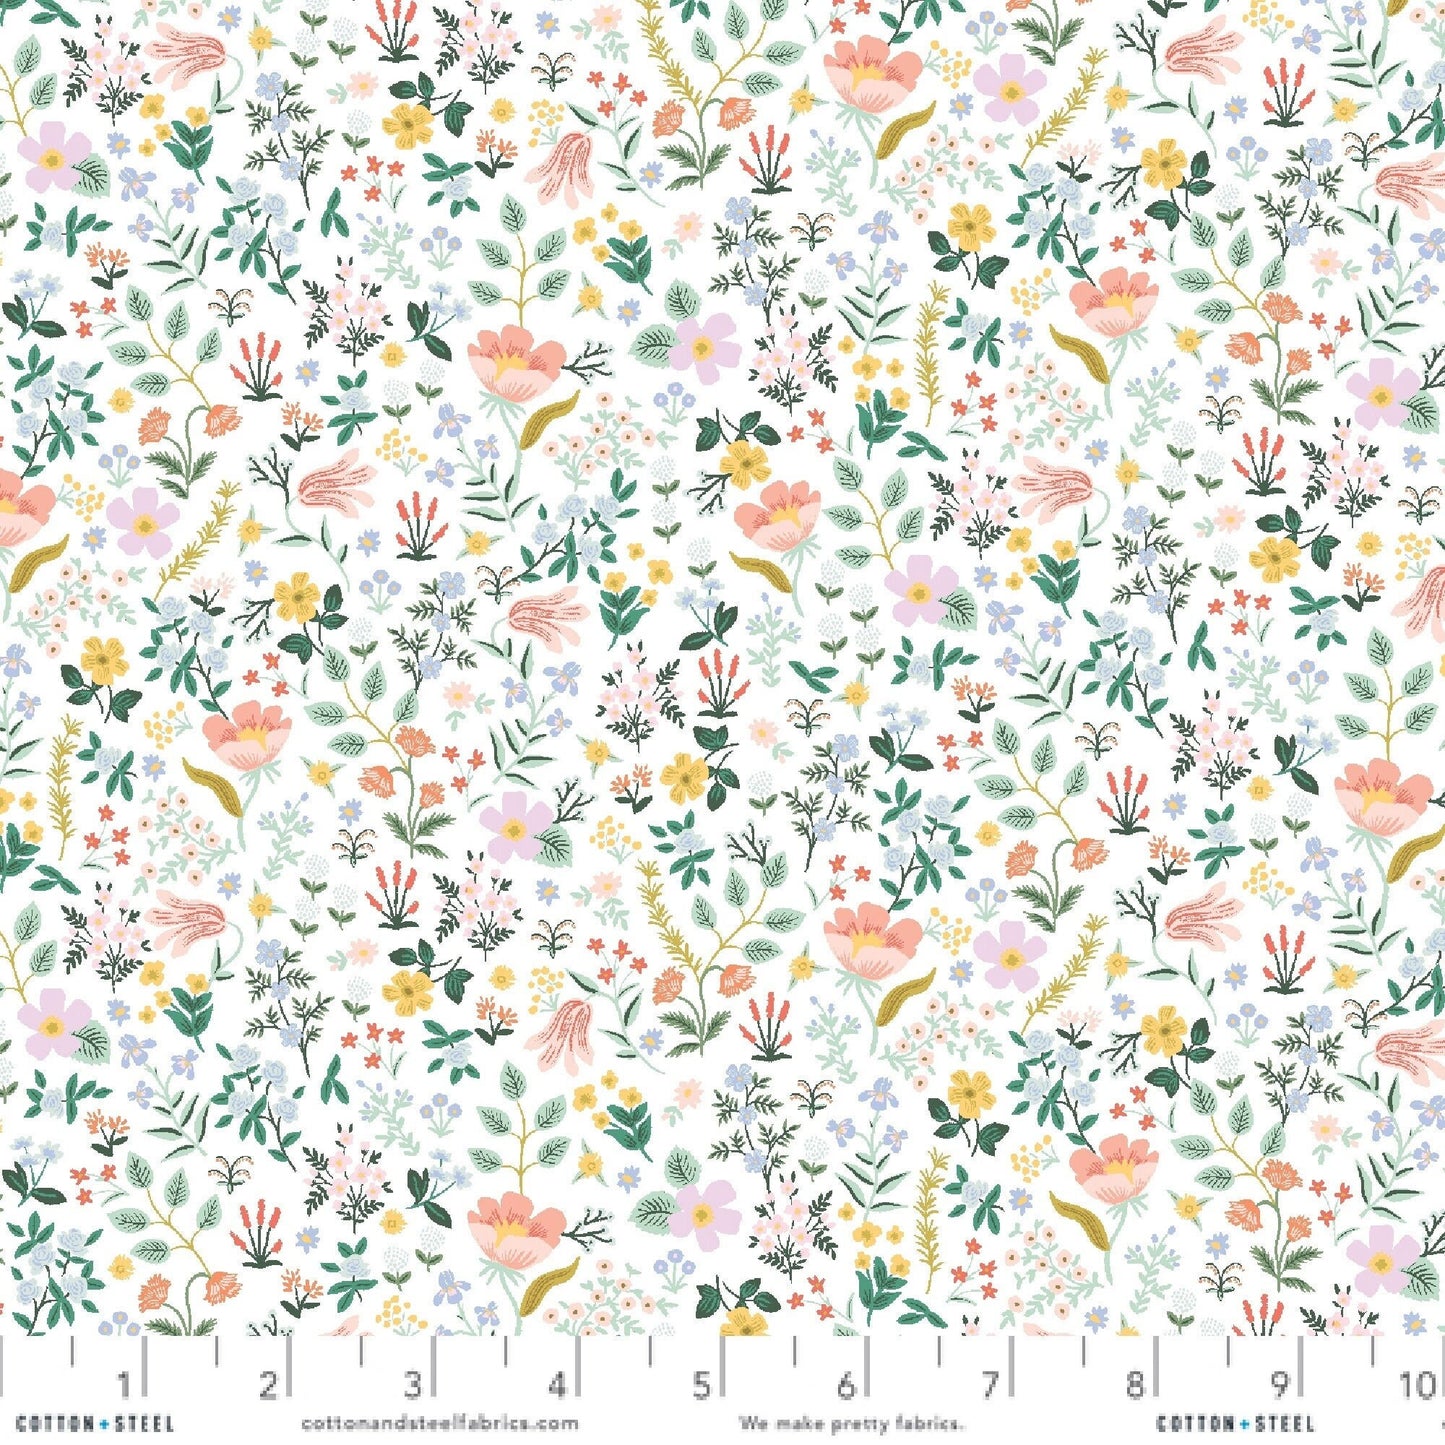 Bramble Fields White Curio Anna Bond Rifle Paper Co Cotton + Steel 100% Quilters Cotton RP1108 WH1 Fabric Fetish